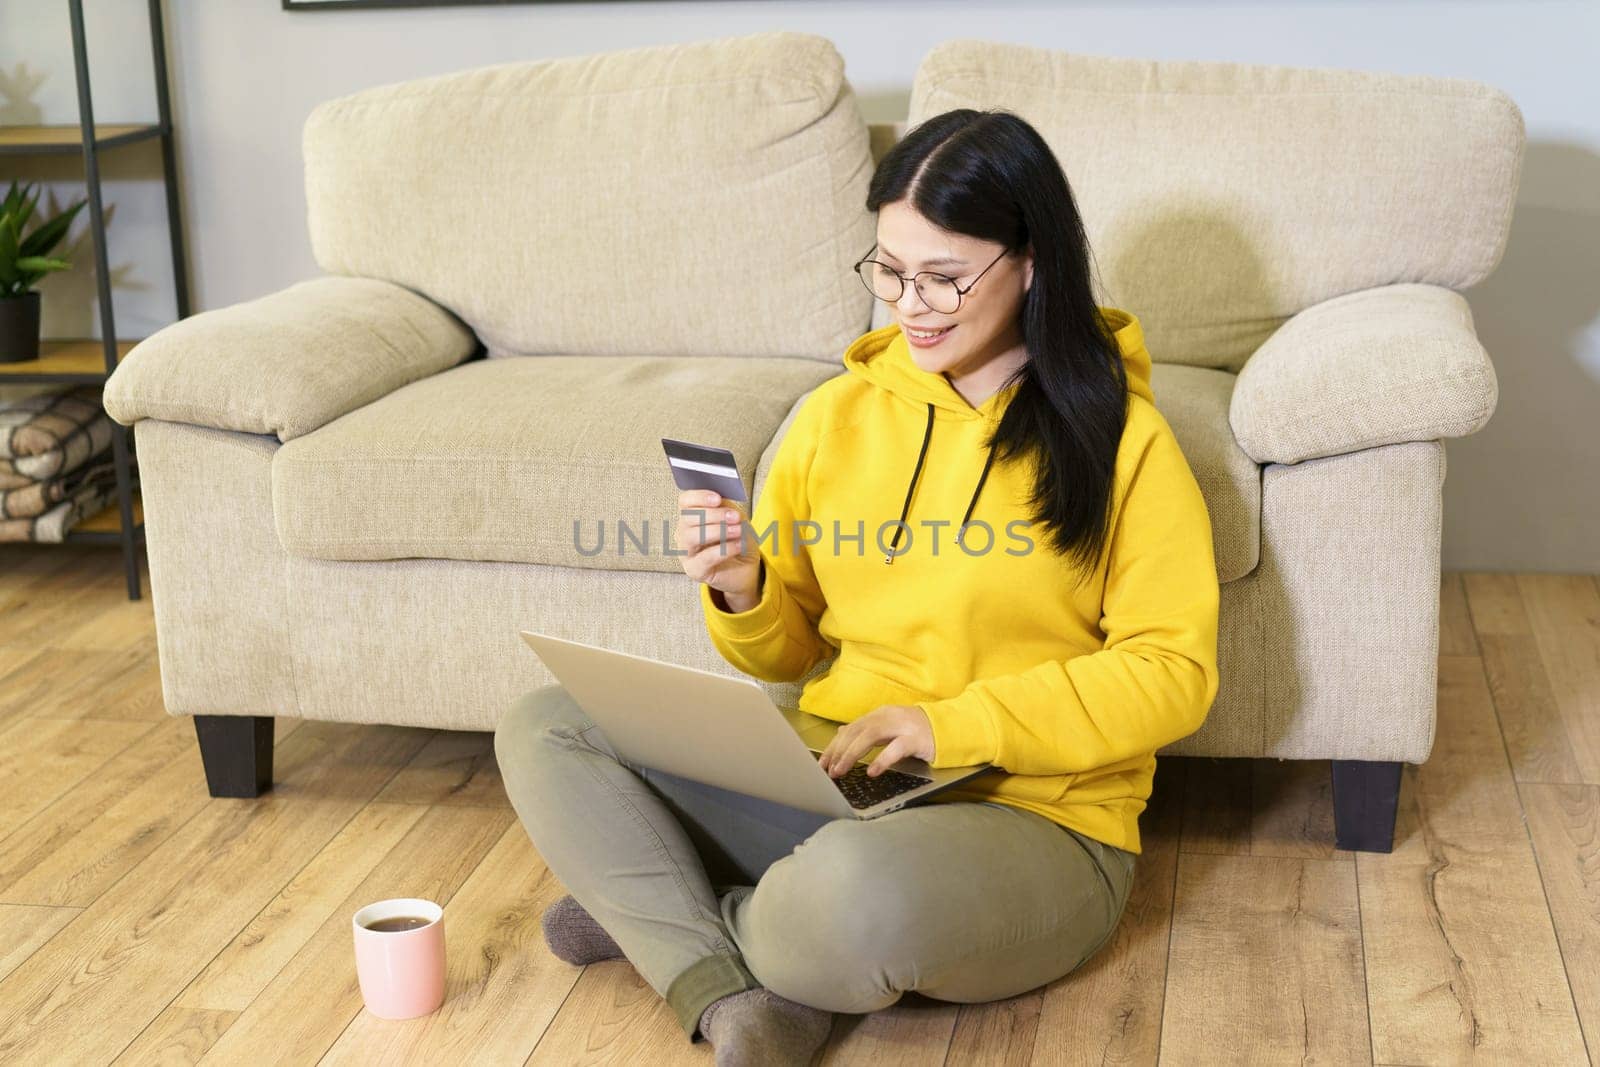 Mature Asian woman wearing glasses is sitting comfortably on floor with laptop, holding bankcard, and cup of coffee. She is engaged in digital work, enjoying moment of relaxation with her favorite beverage while working from home. by LipikStockMedia